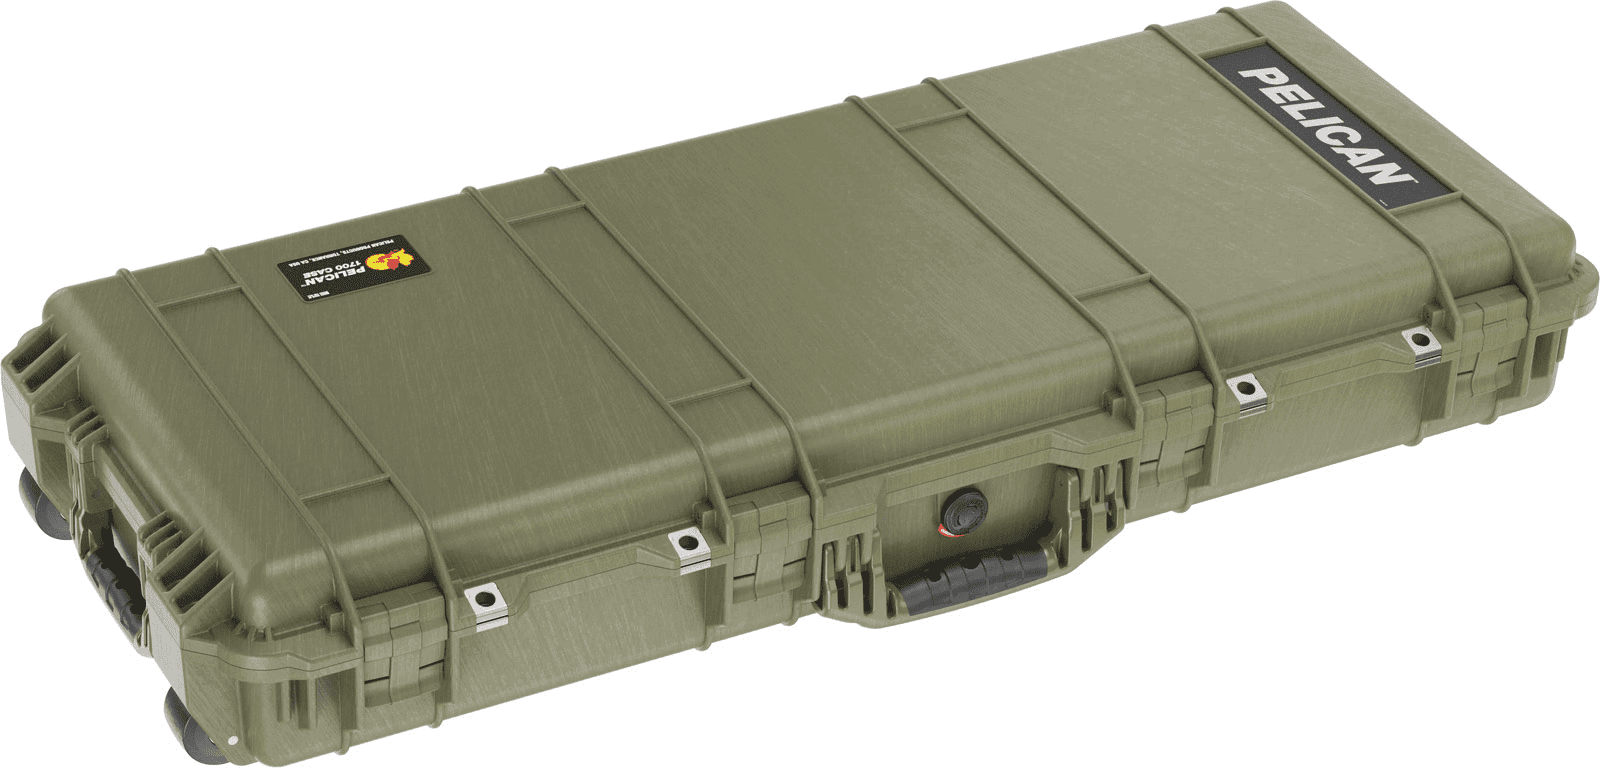 Pelican Products 1720 Protector Long Case - OD Green, Foam